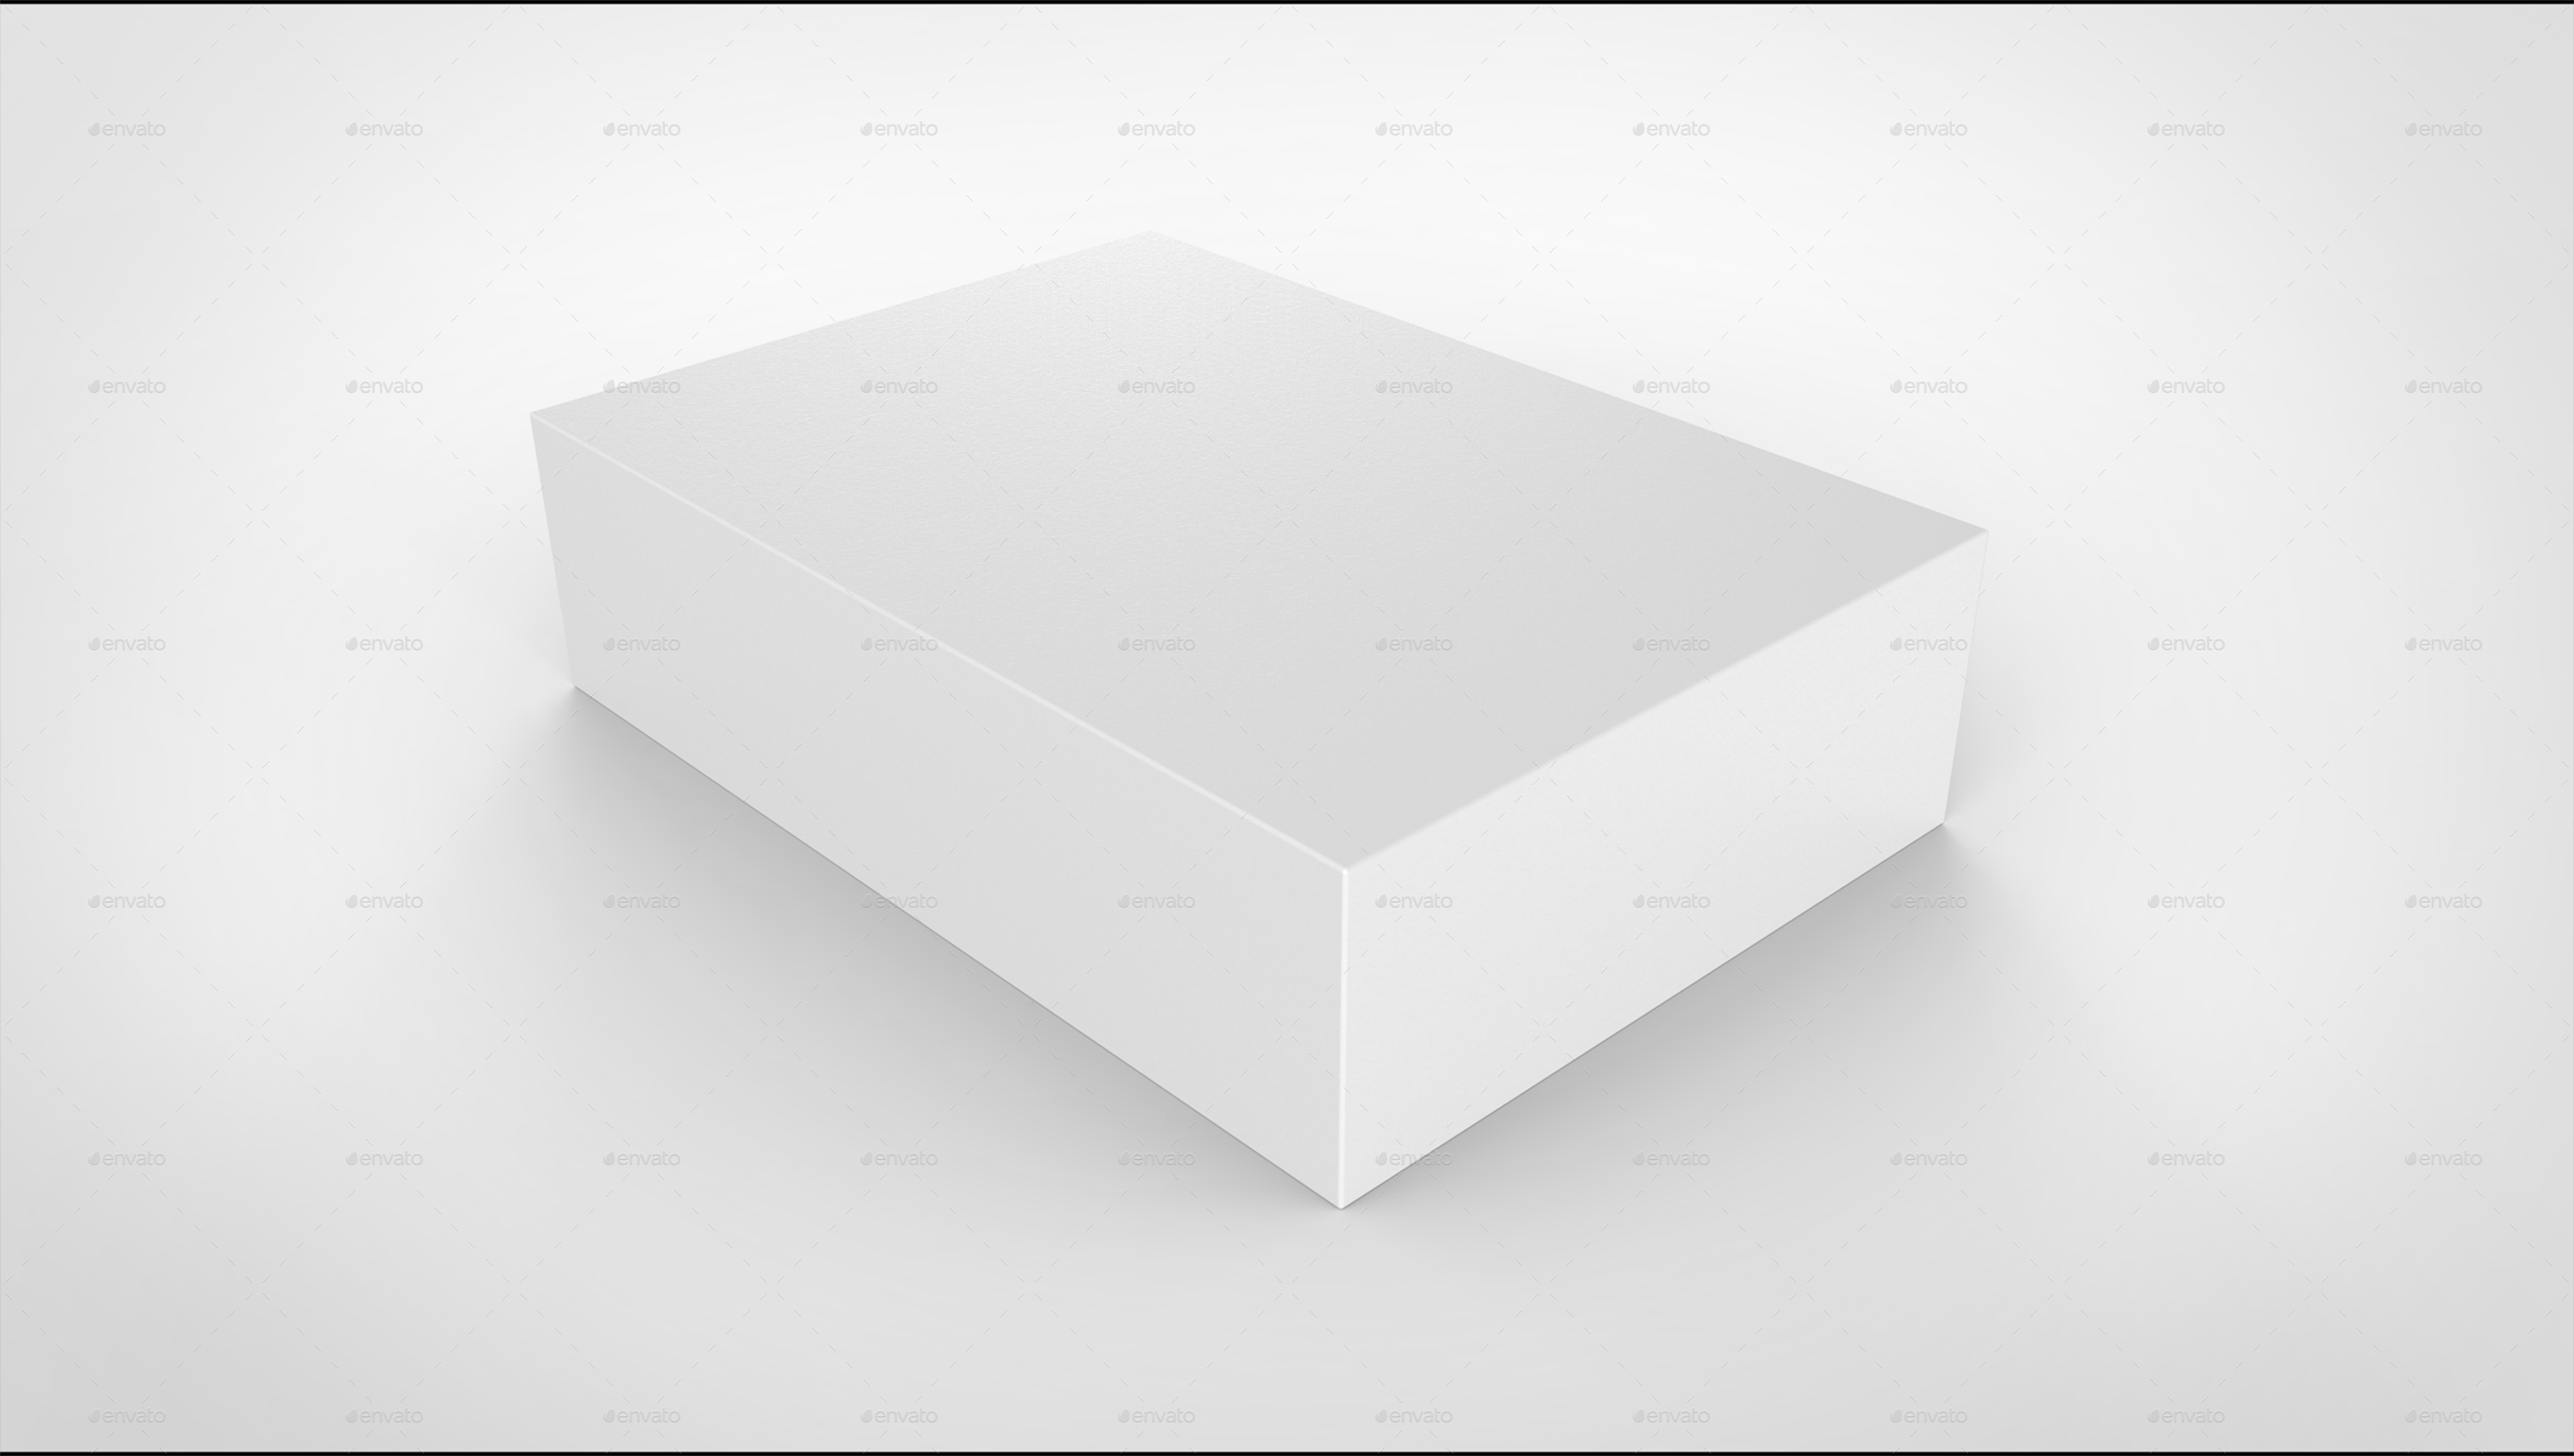 Download Free photo: 3D Boxes - 3d, Boxes, Cardboard - Free ...